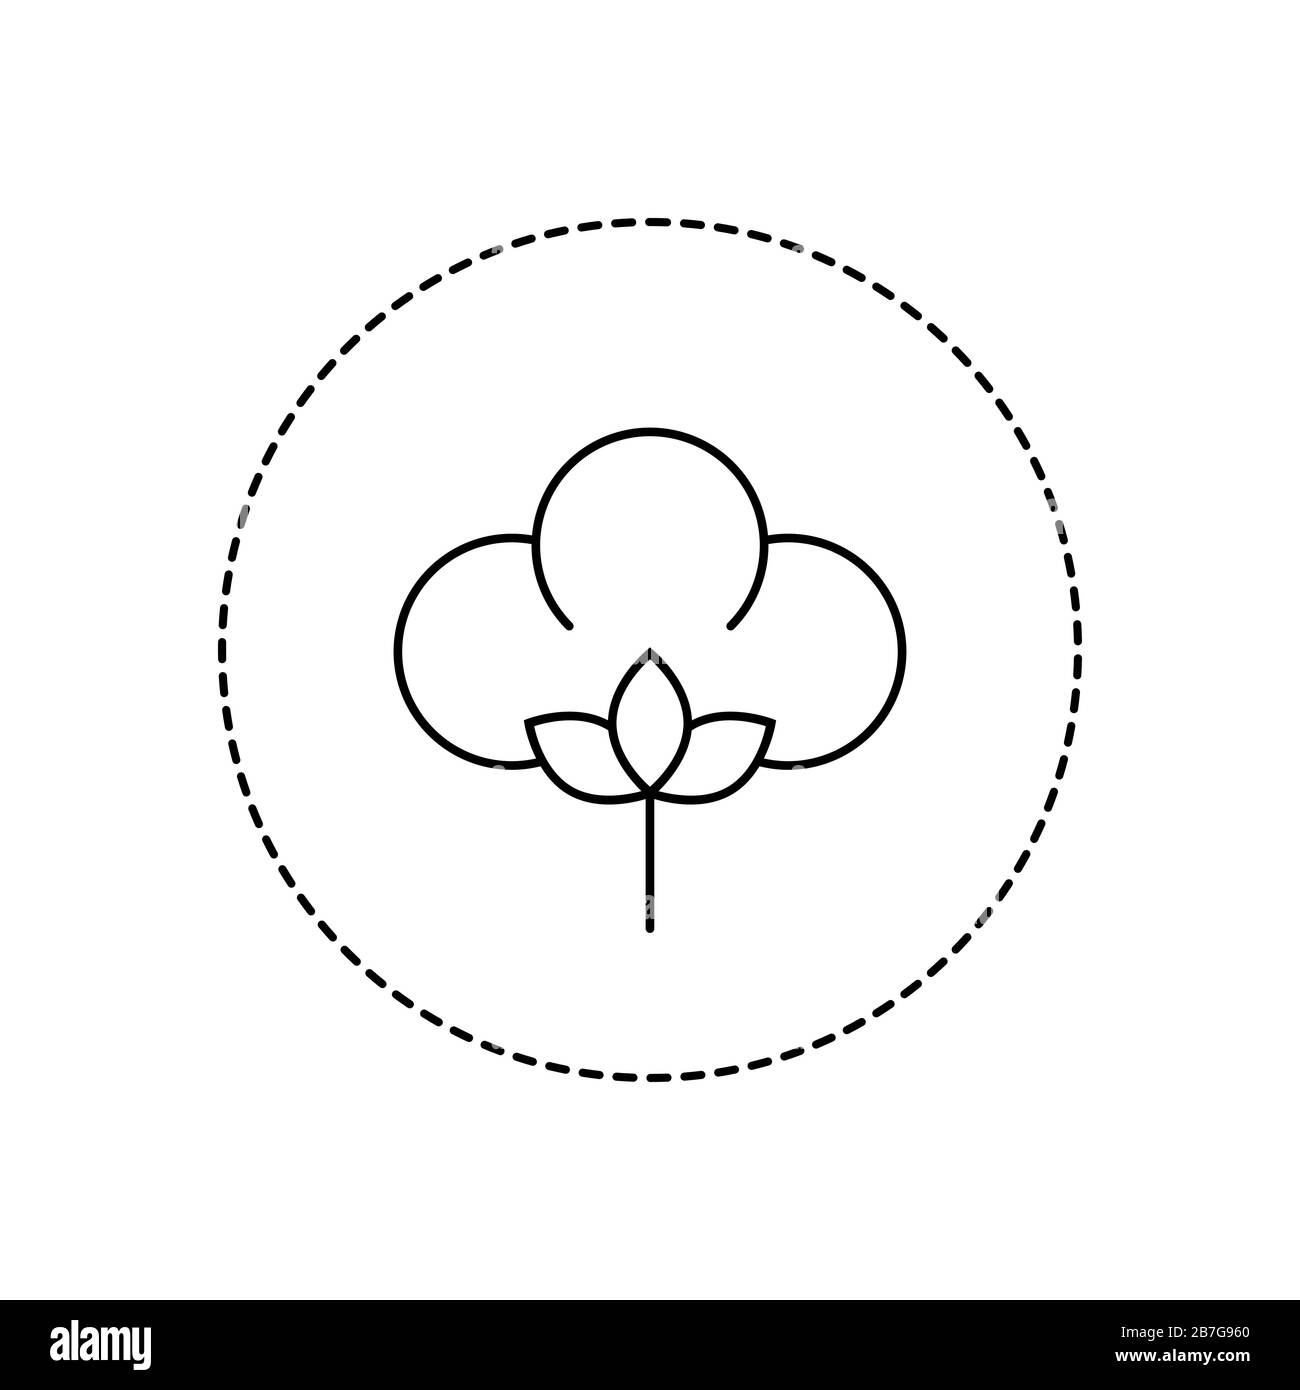 Cotton icon in a circle. Symbol for natural fabrics and ethical fashion  industry. Organic cotton linear sign. 100% cotton label. Round tag or logo  Stock Vector Image & Art - Alamy